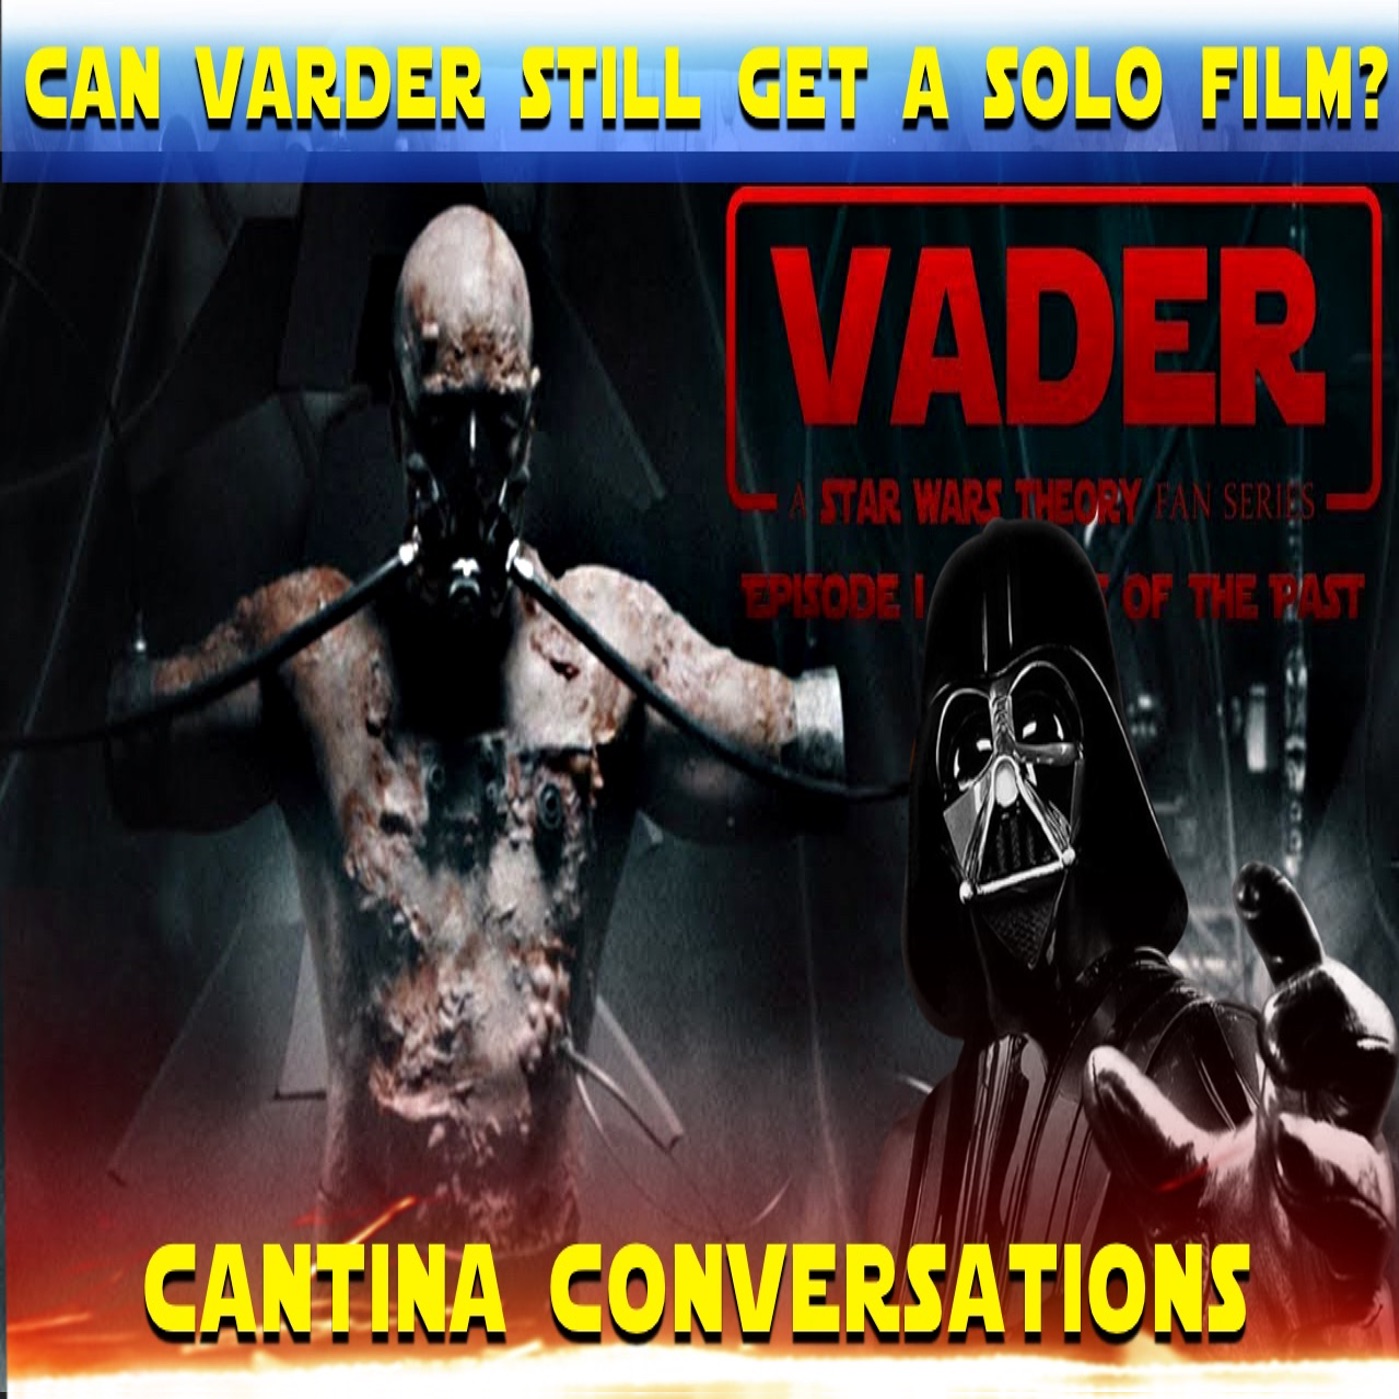 Could Vader Get A Solo Film?/Shards Of The Past Review